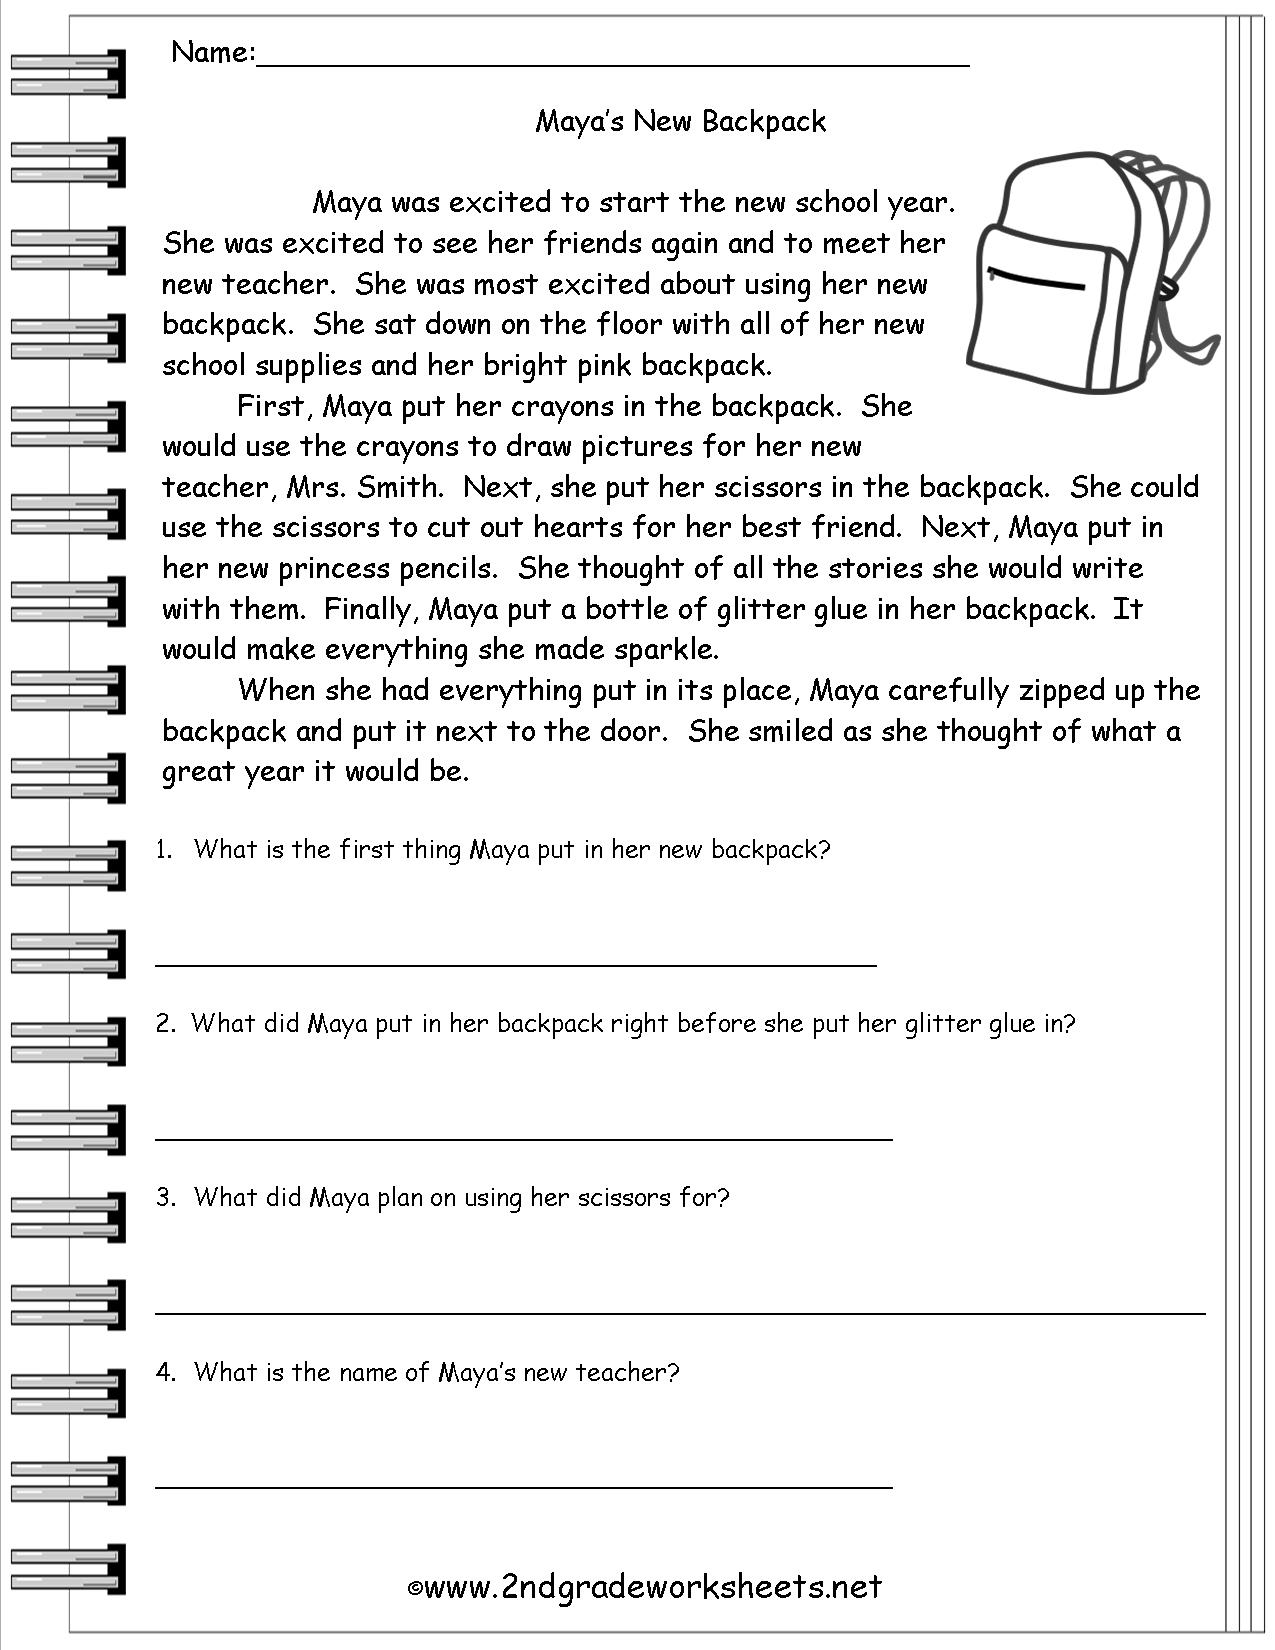 top-reading-worksheets-for-6th-grade-with-questions-tips-reading